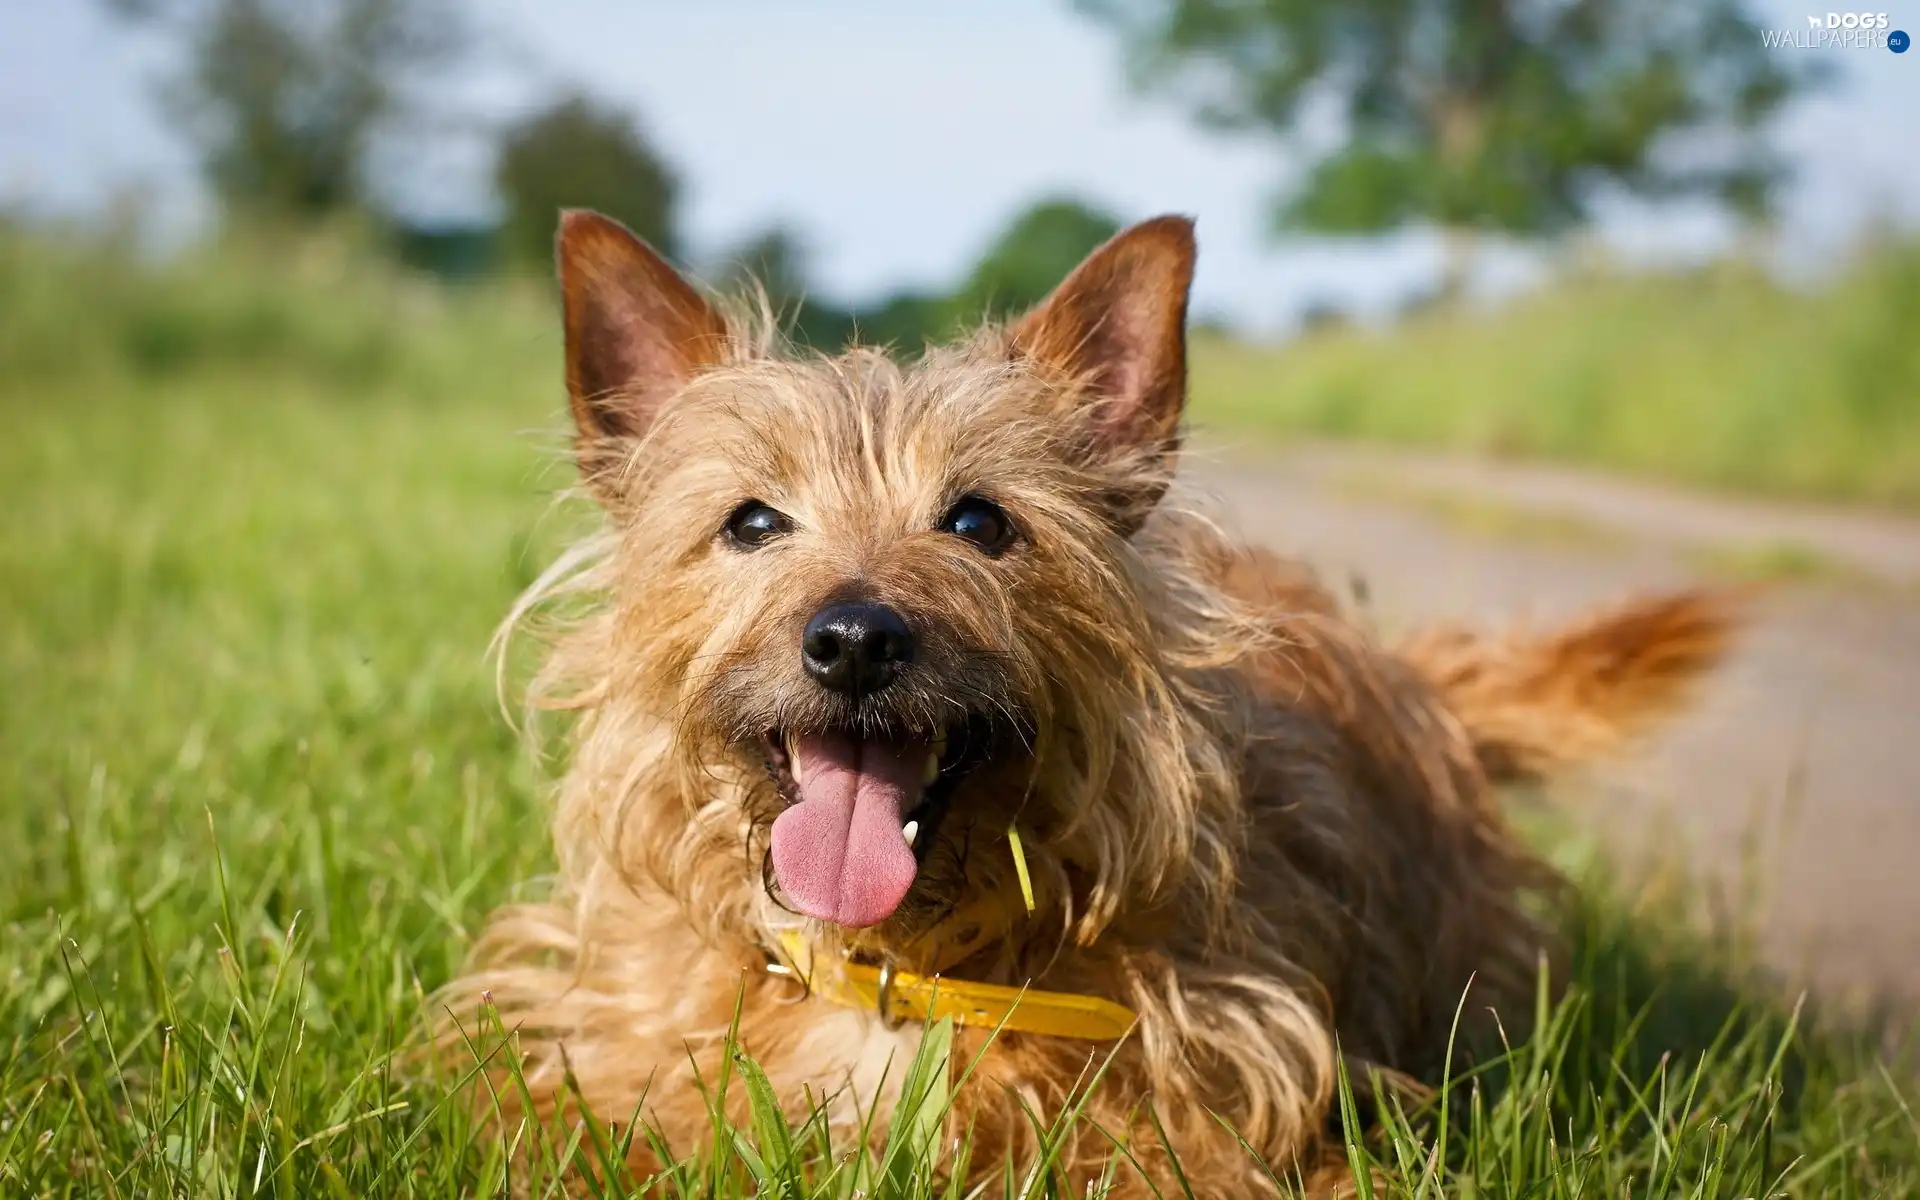 Terrier, Meadow, doggy